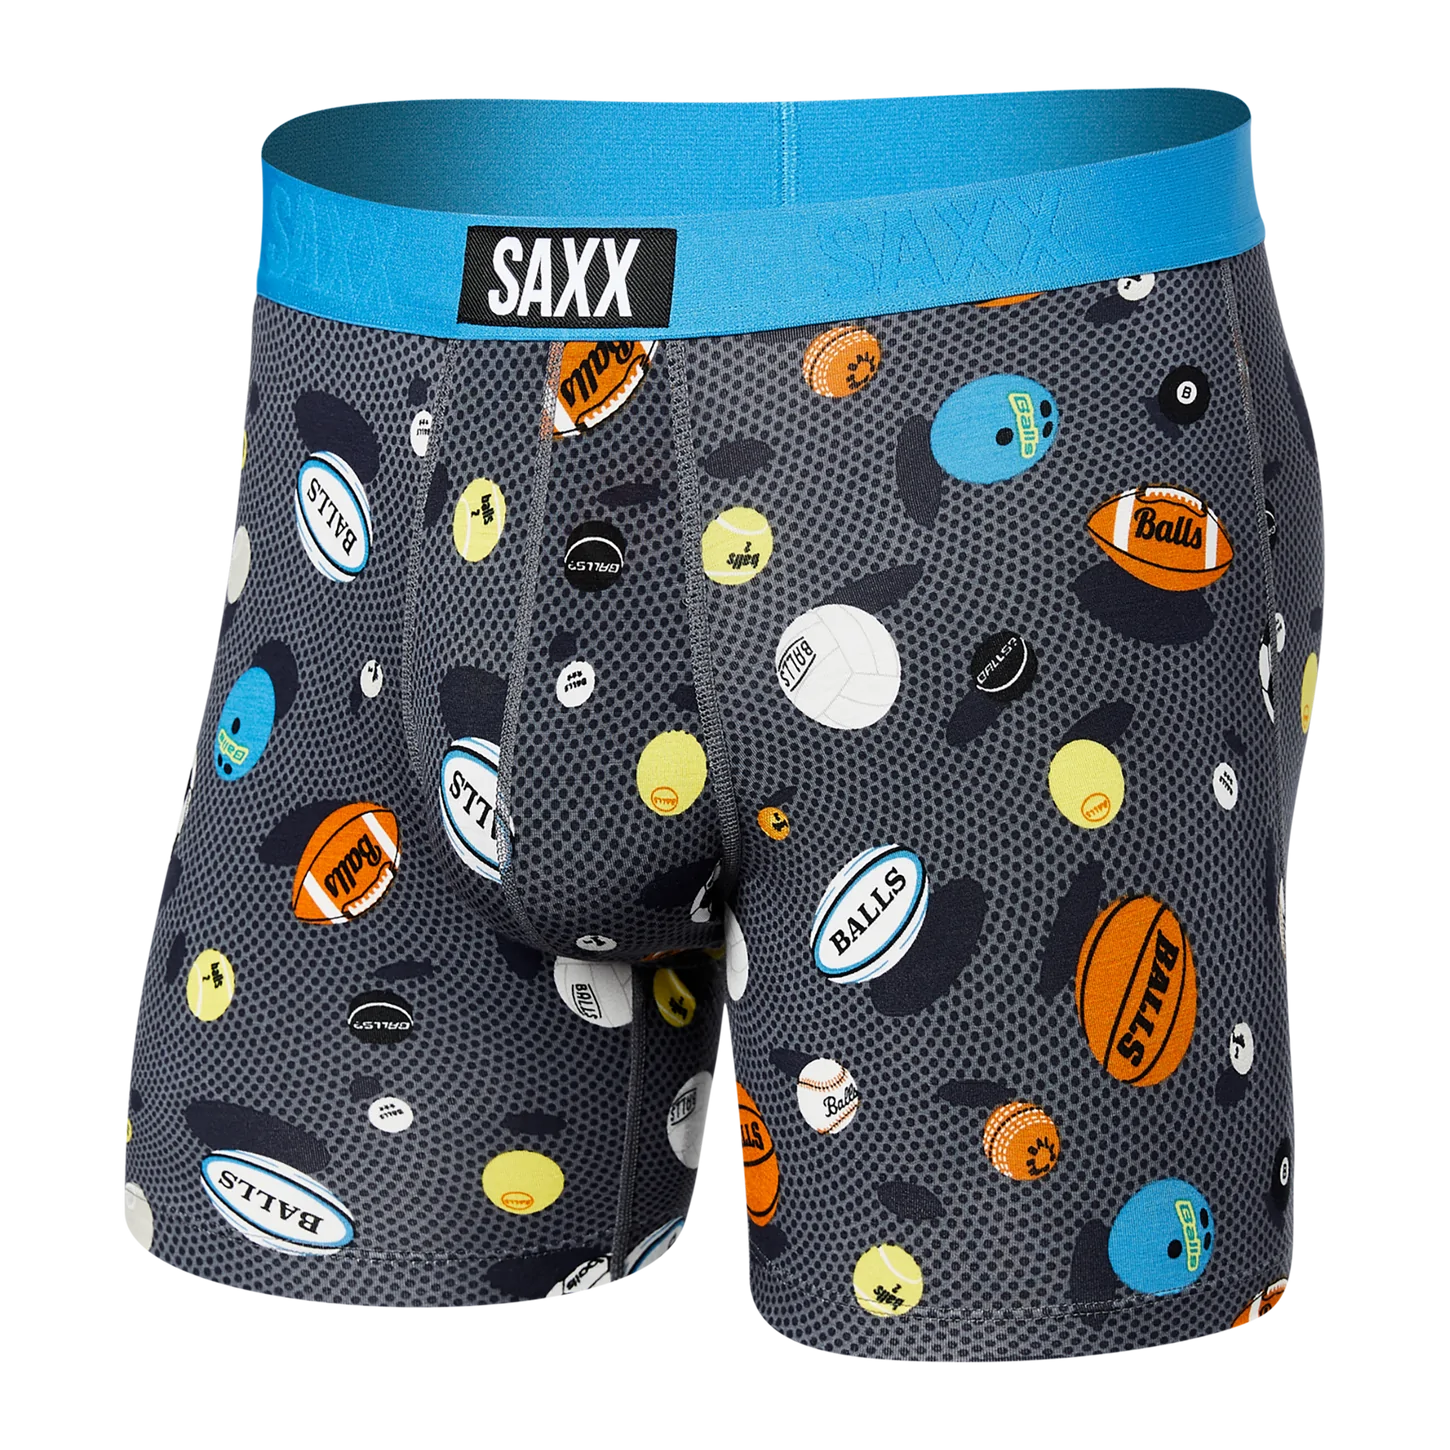 Saxx Men's Vibe Boxer Brief- Balls To The Wall-Black - Andy Thornal Company